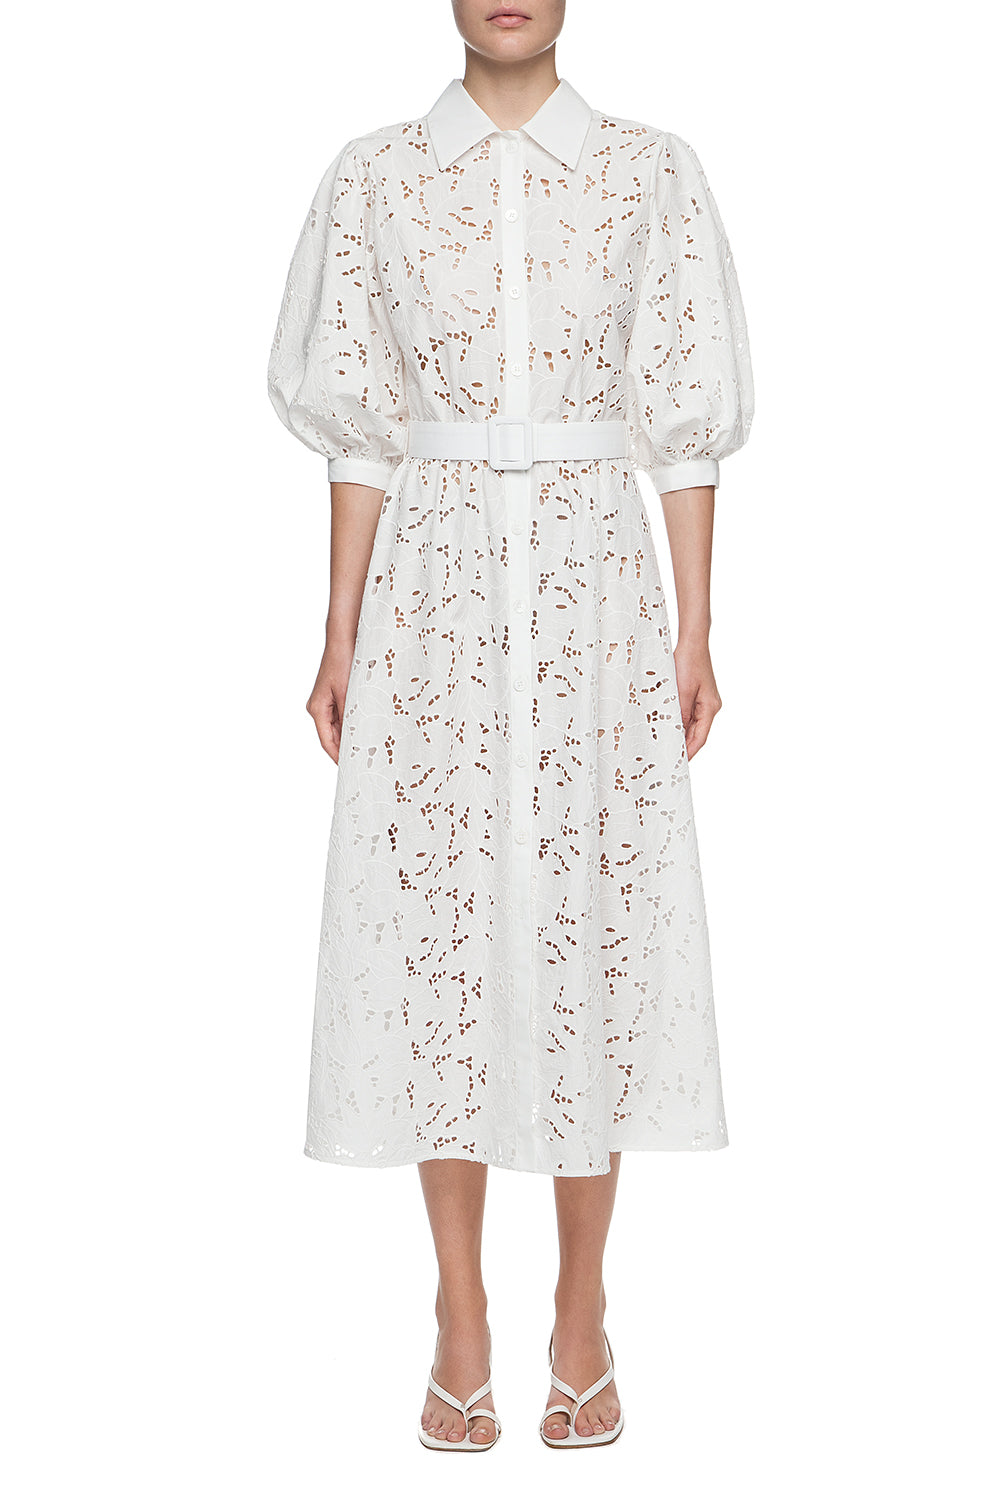 White cotton embroidered shirt-dress